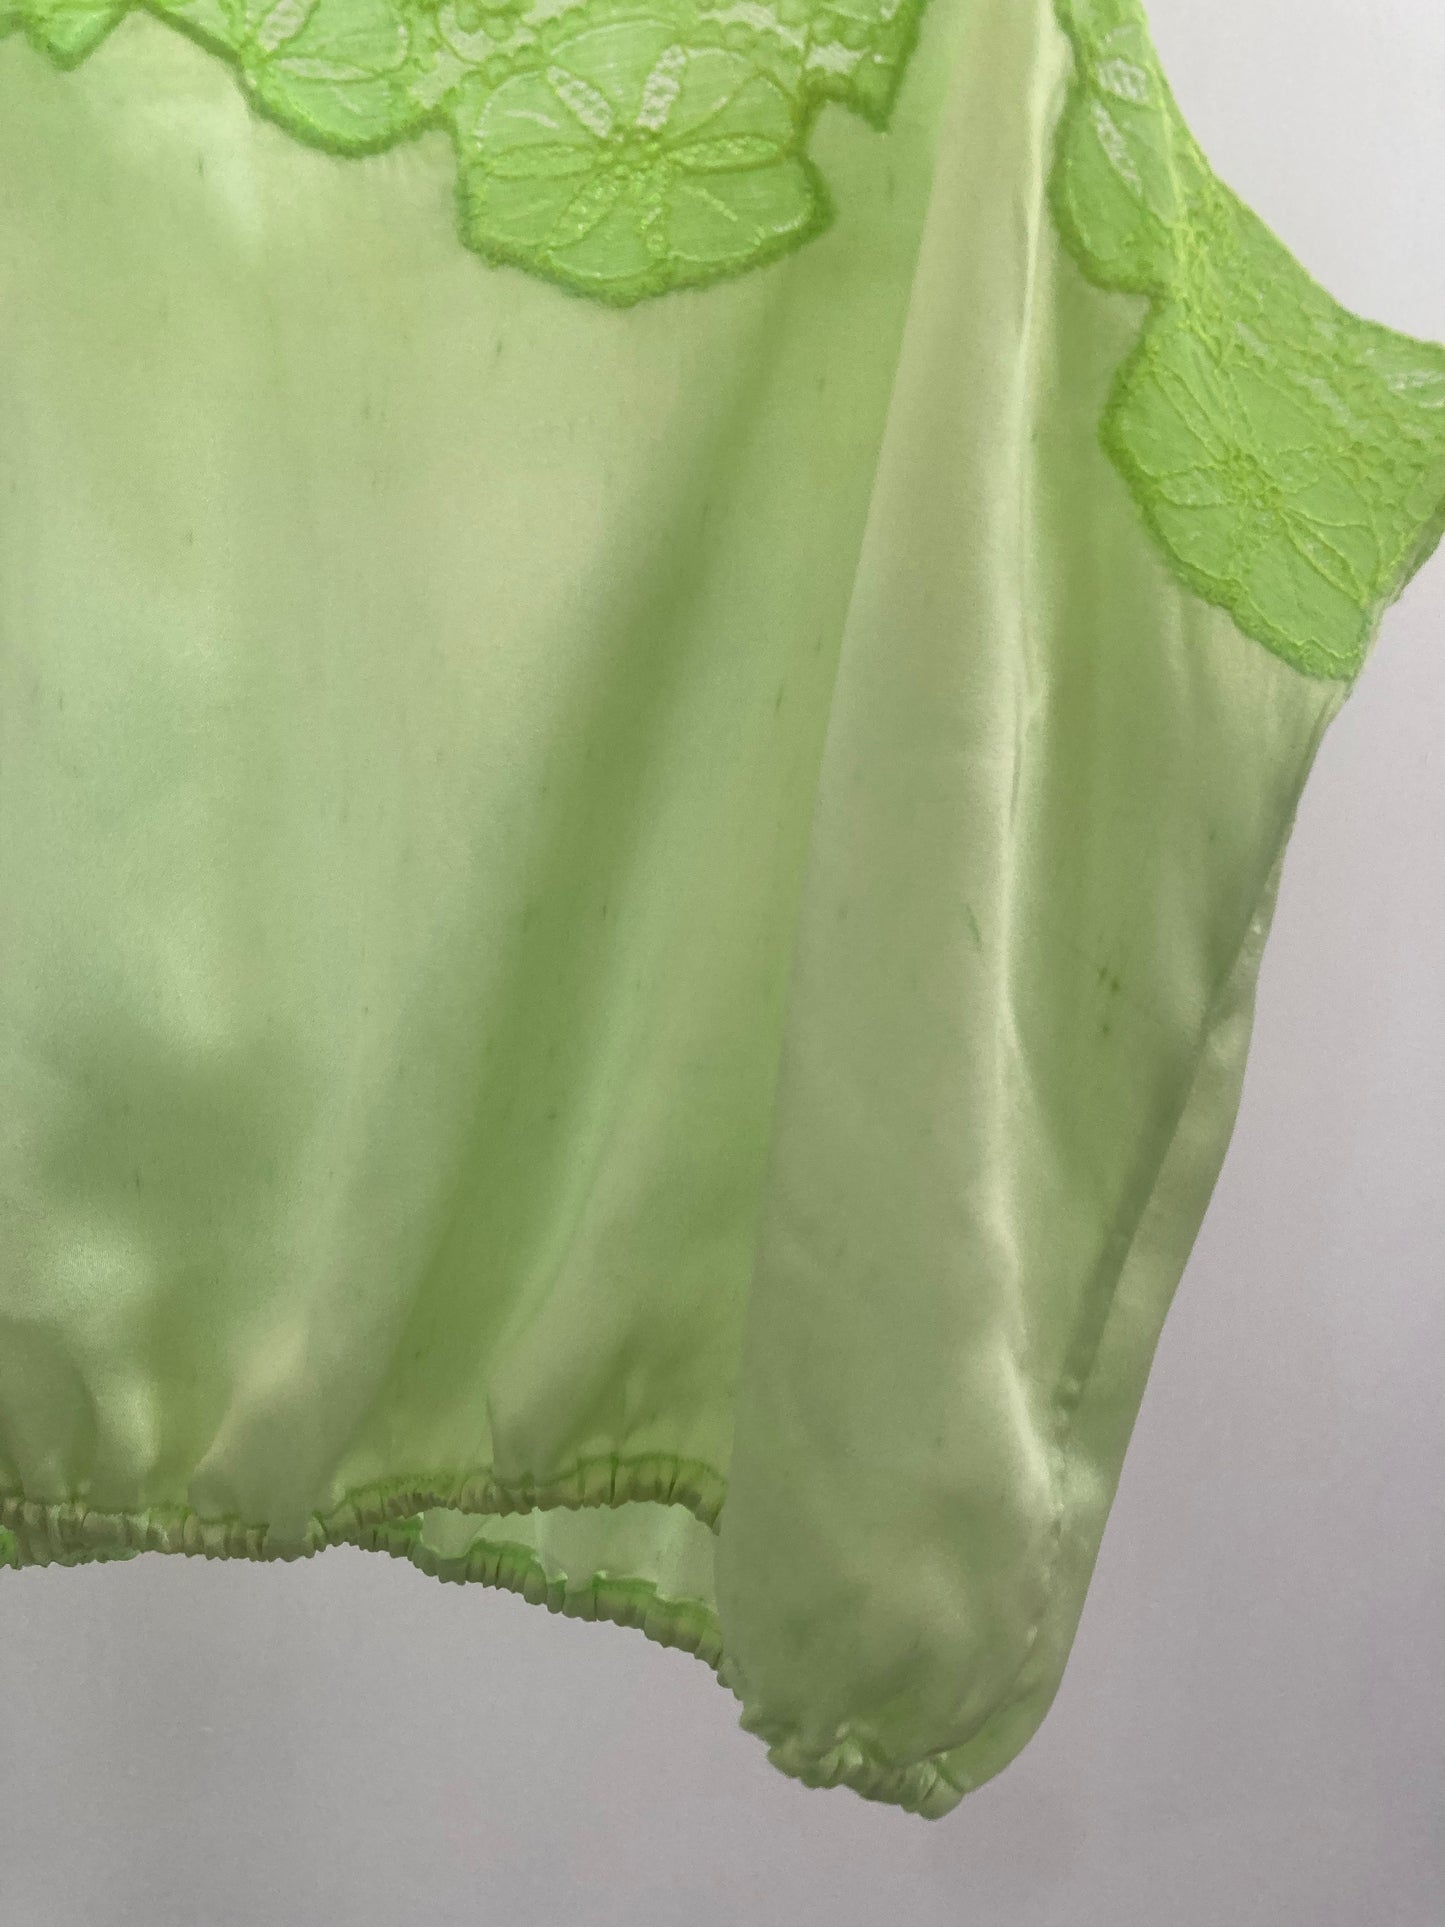 1930s Satin & Lace Dyed Camisole - Lime Green